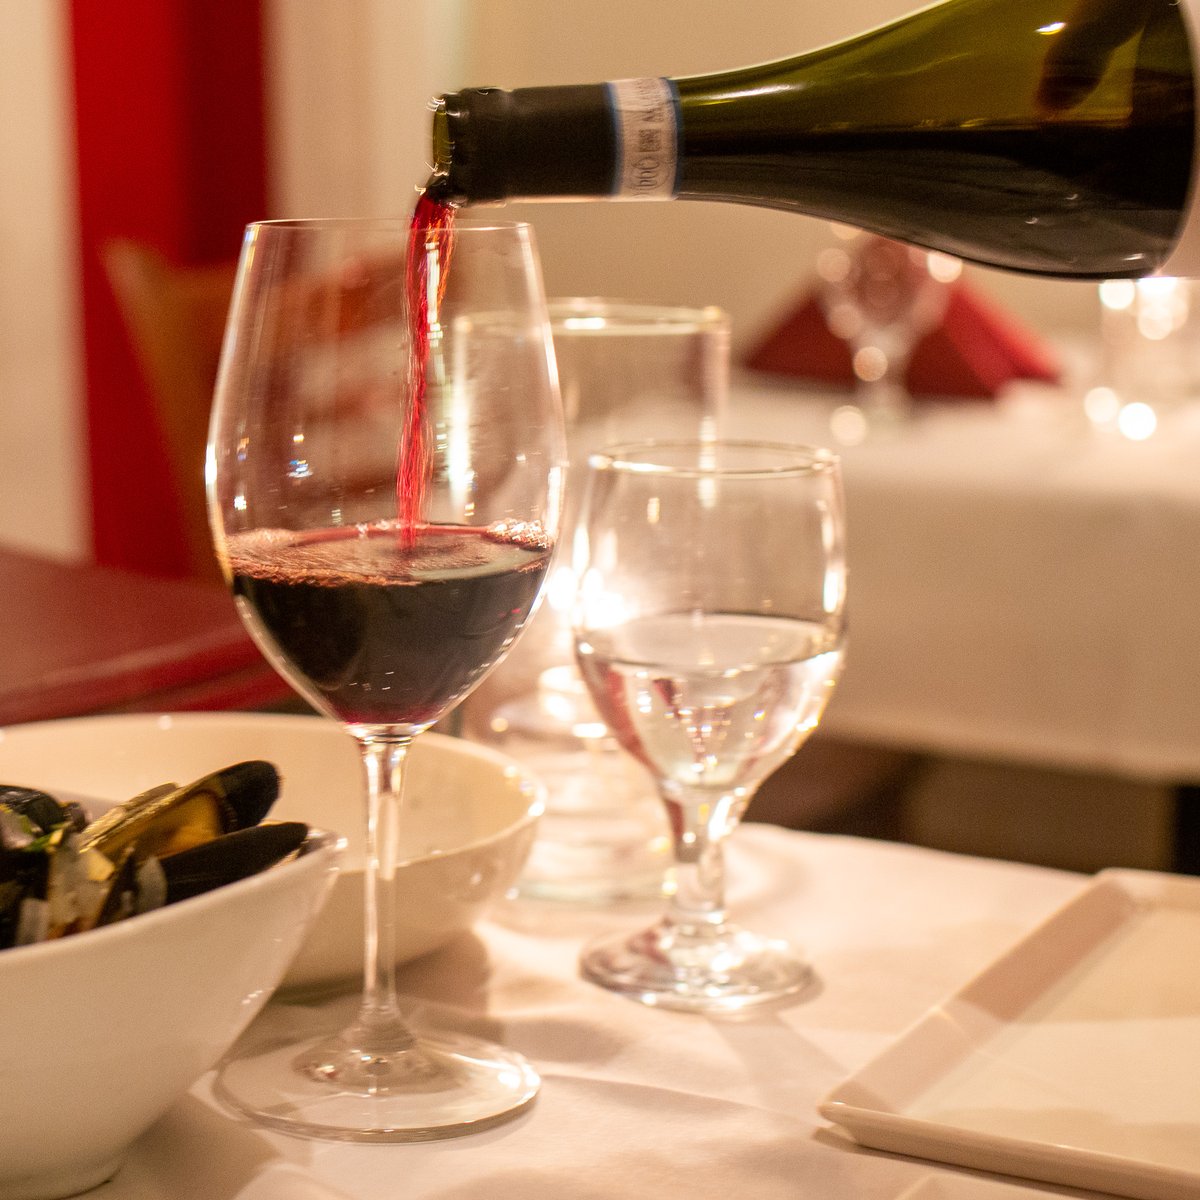 What pairs well with a glass of red? The rest of the bottle because it's #WineWednesday! Join us this evening from 5 - 10:30 PM to enjoy half-priced wine bottles🍷 We can’t wait to wine and dine with you!⁣⁣ #florianarestaurantdc #florianadc #italiandining #dcfoodie